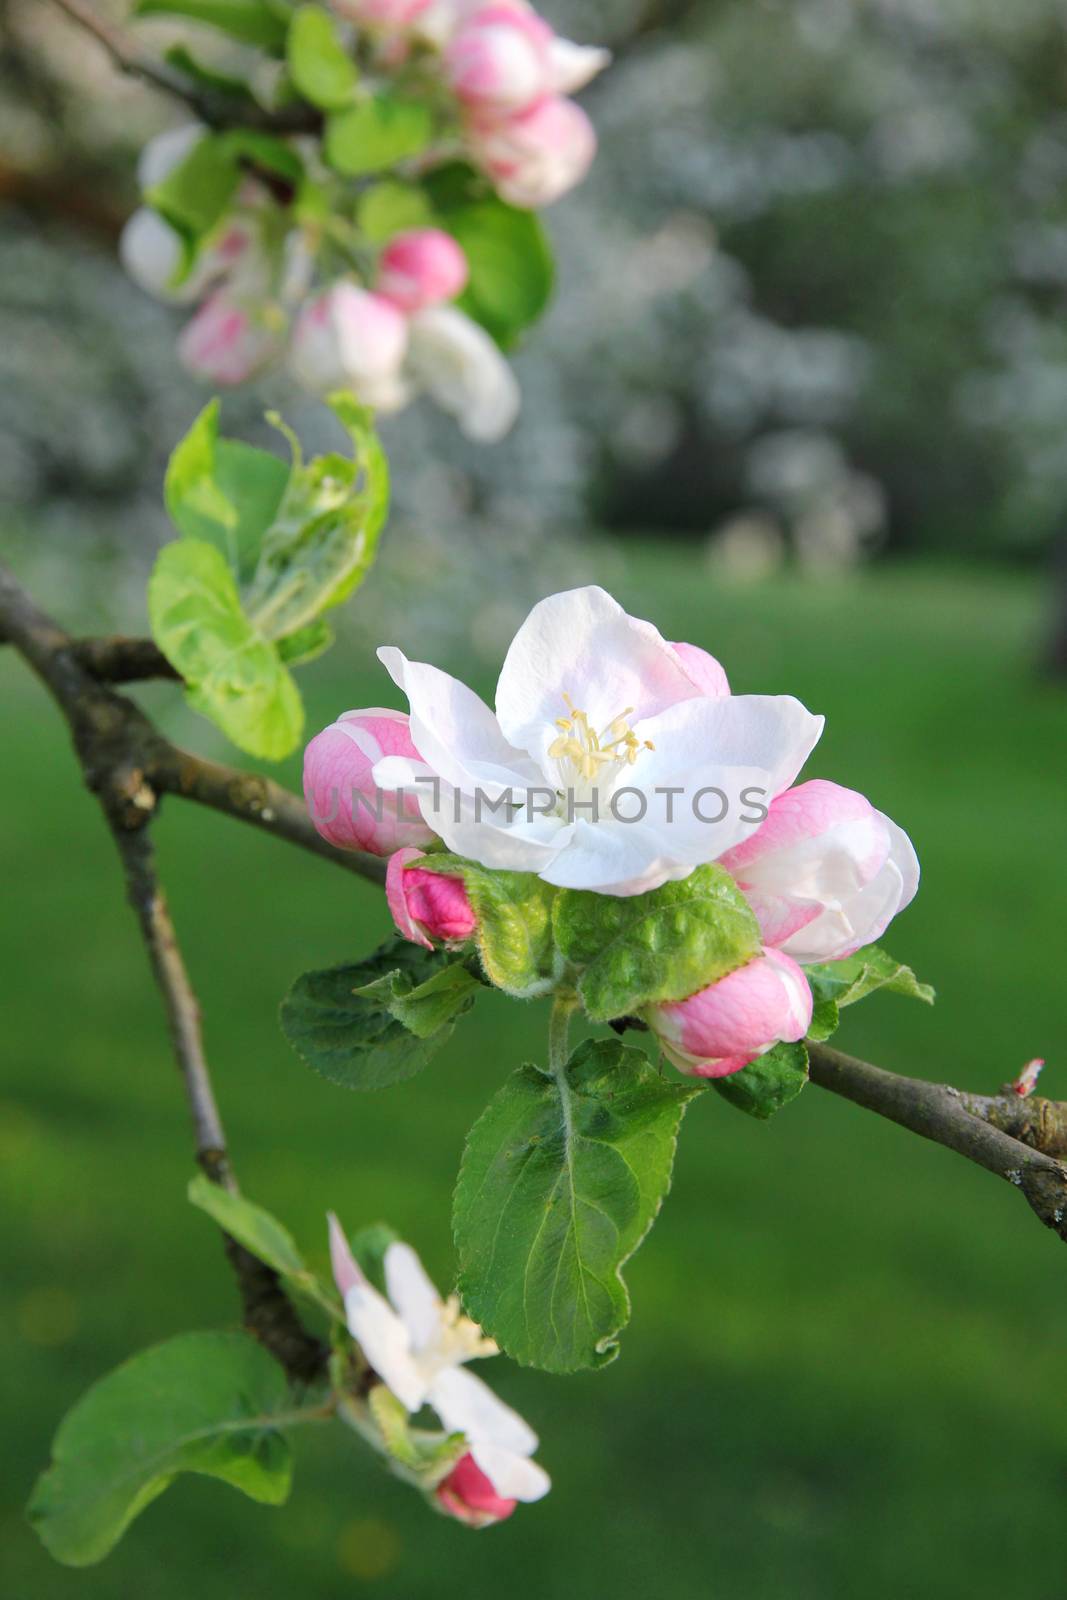 Apple blossoms in spring can use as background